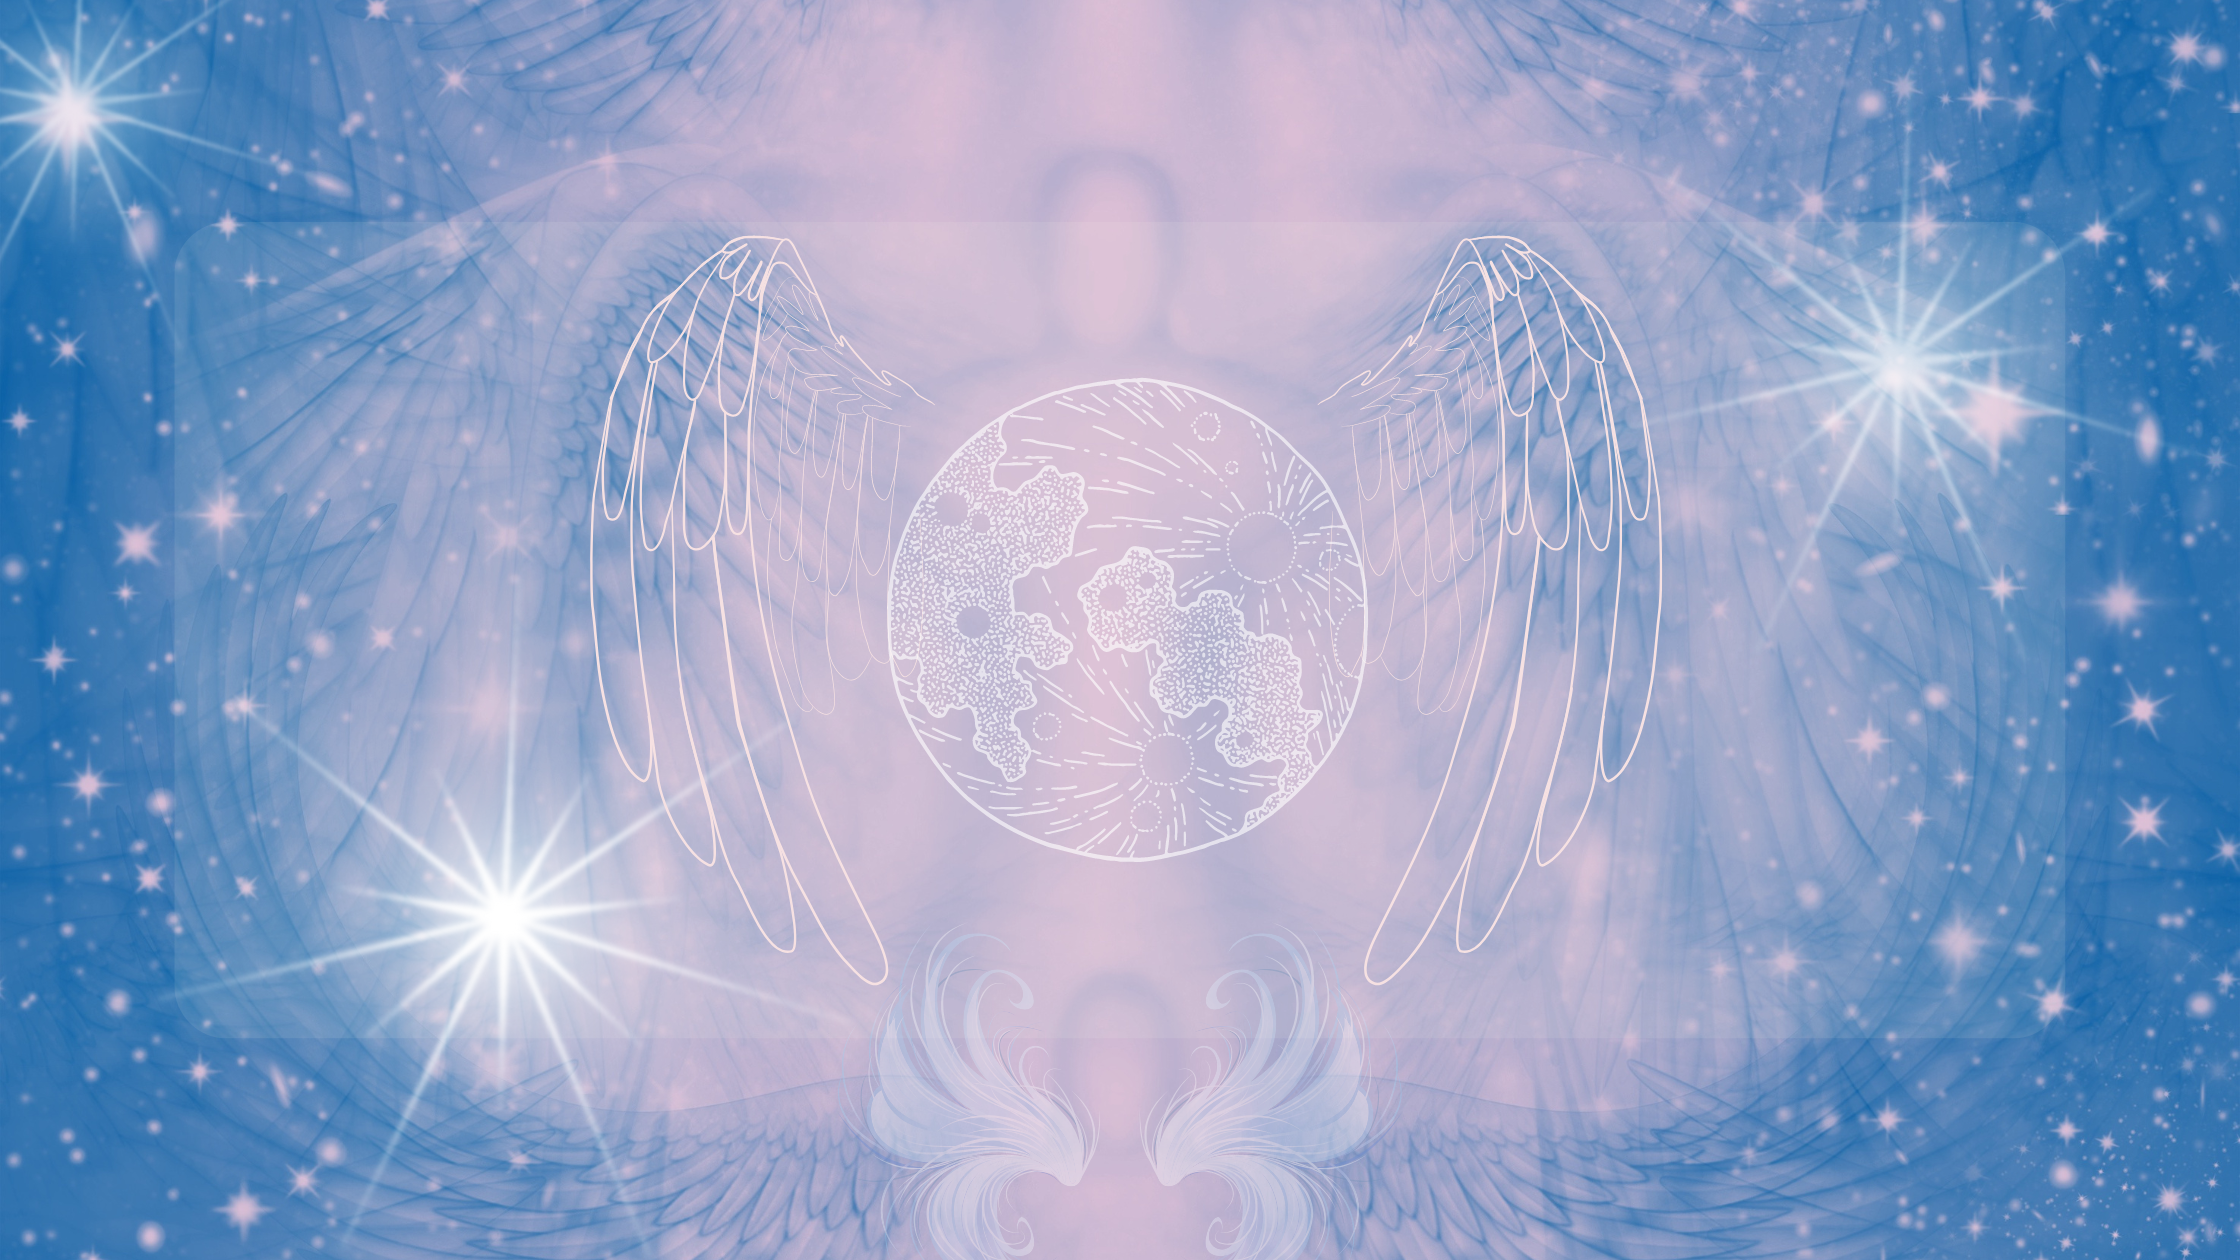 Connect with archangel michael